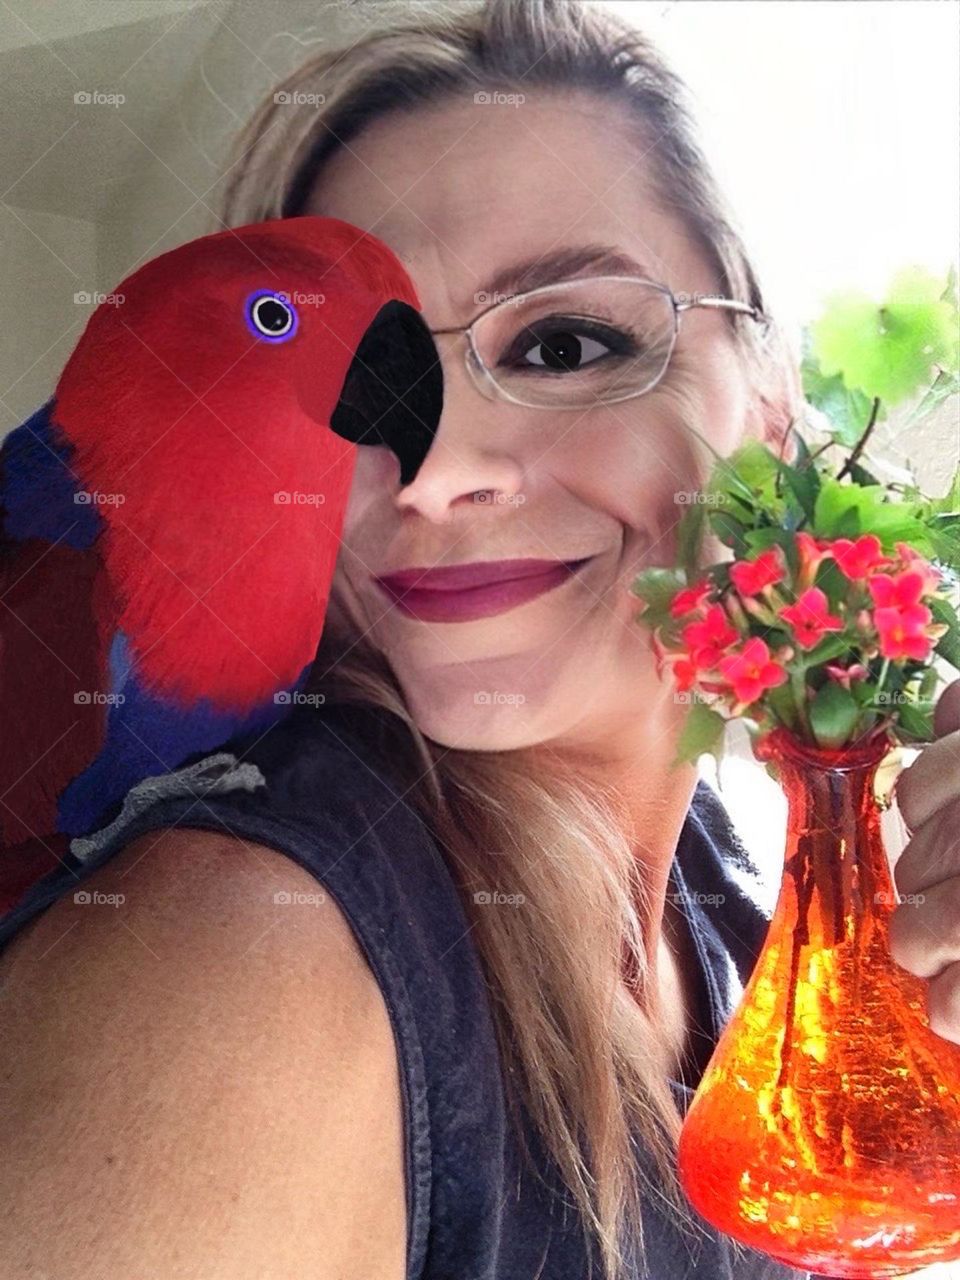 Woman sharing a loving moment with her parrot.